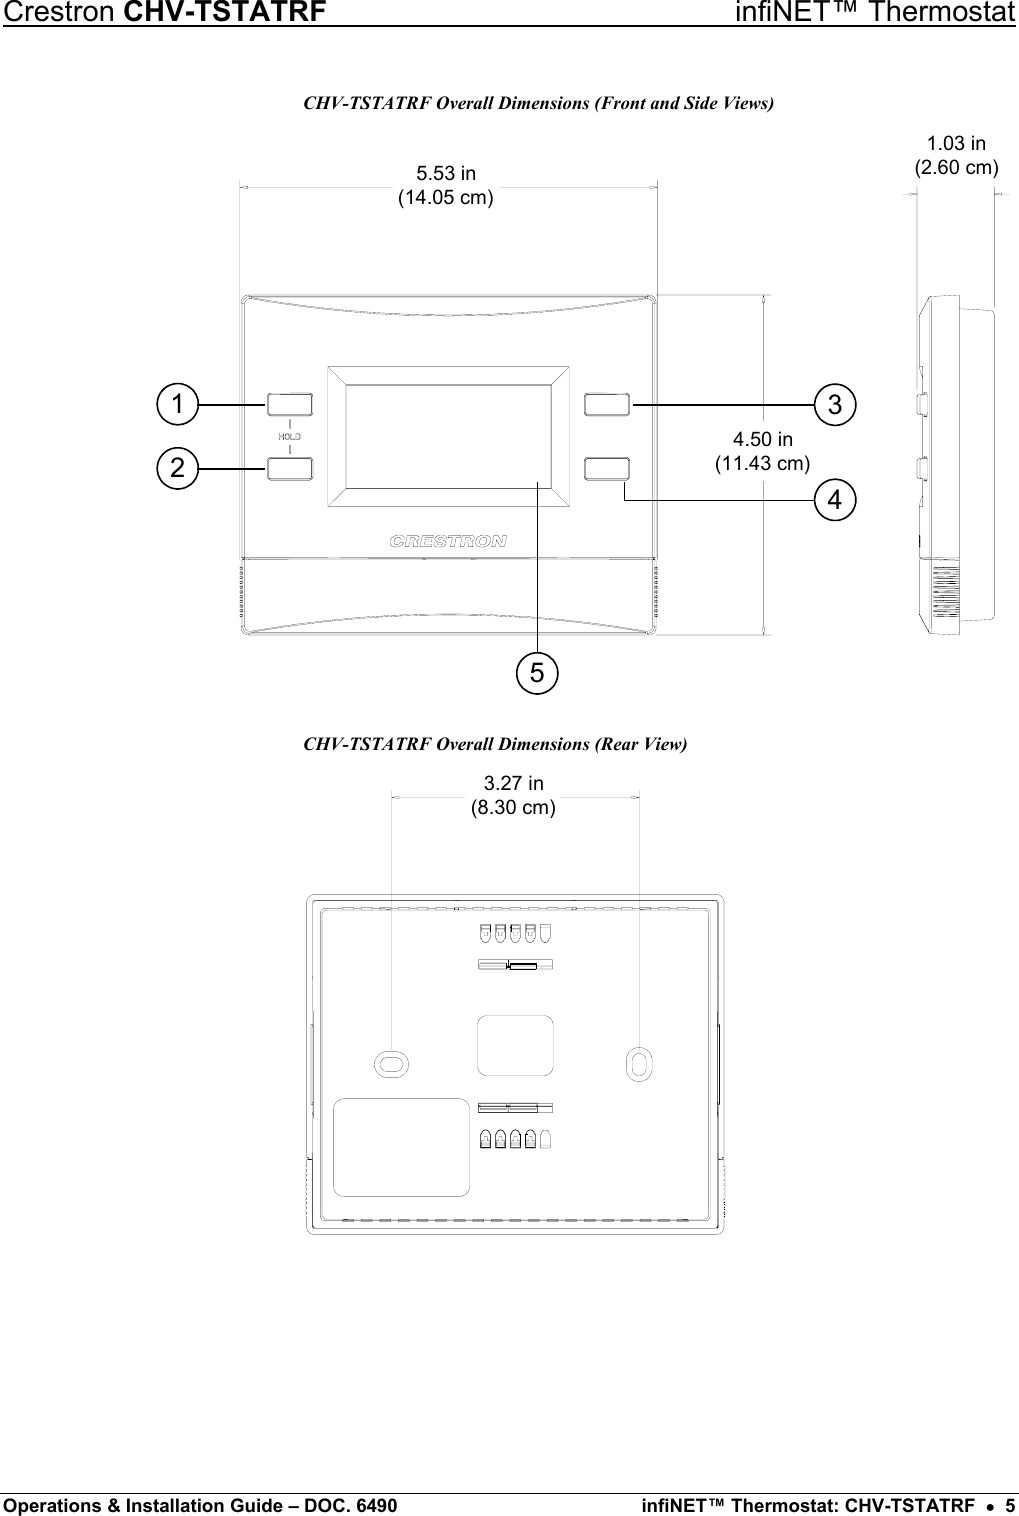 Crestron CHV-TSTATRF   infiNET™ Thermostat CHV-TSTATRF Overall Dimensions (Front and Side Views) 1.03 in(2.60 cm)5.53 in(14.05 cm)4.50 in(11.43 cm)12345 CHV-TSTATRF Overall Dimensions (Rear View) 3.27 in(8.30 cm) Operations &amp; Installation Guide – DOC. 6490  infiNET™ Thermostat: CHV-TSTATRF  •  5 